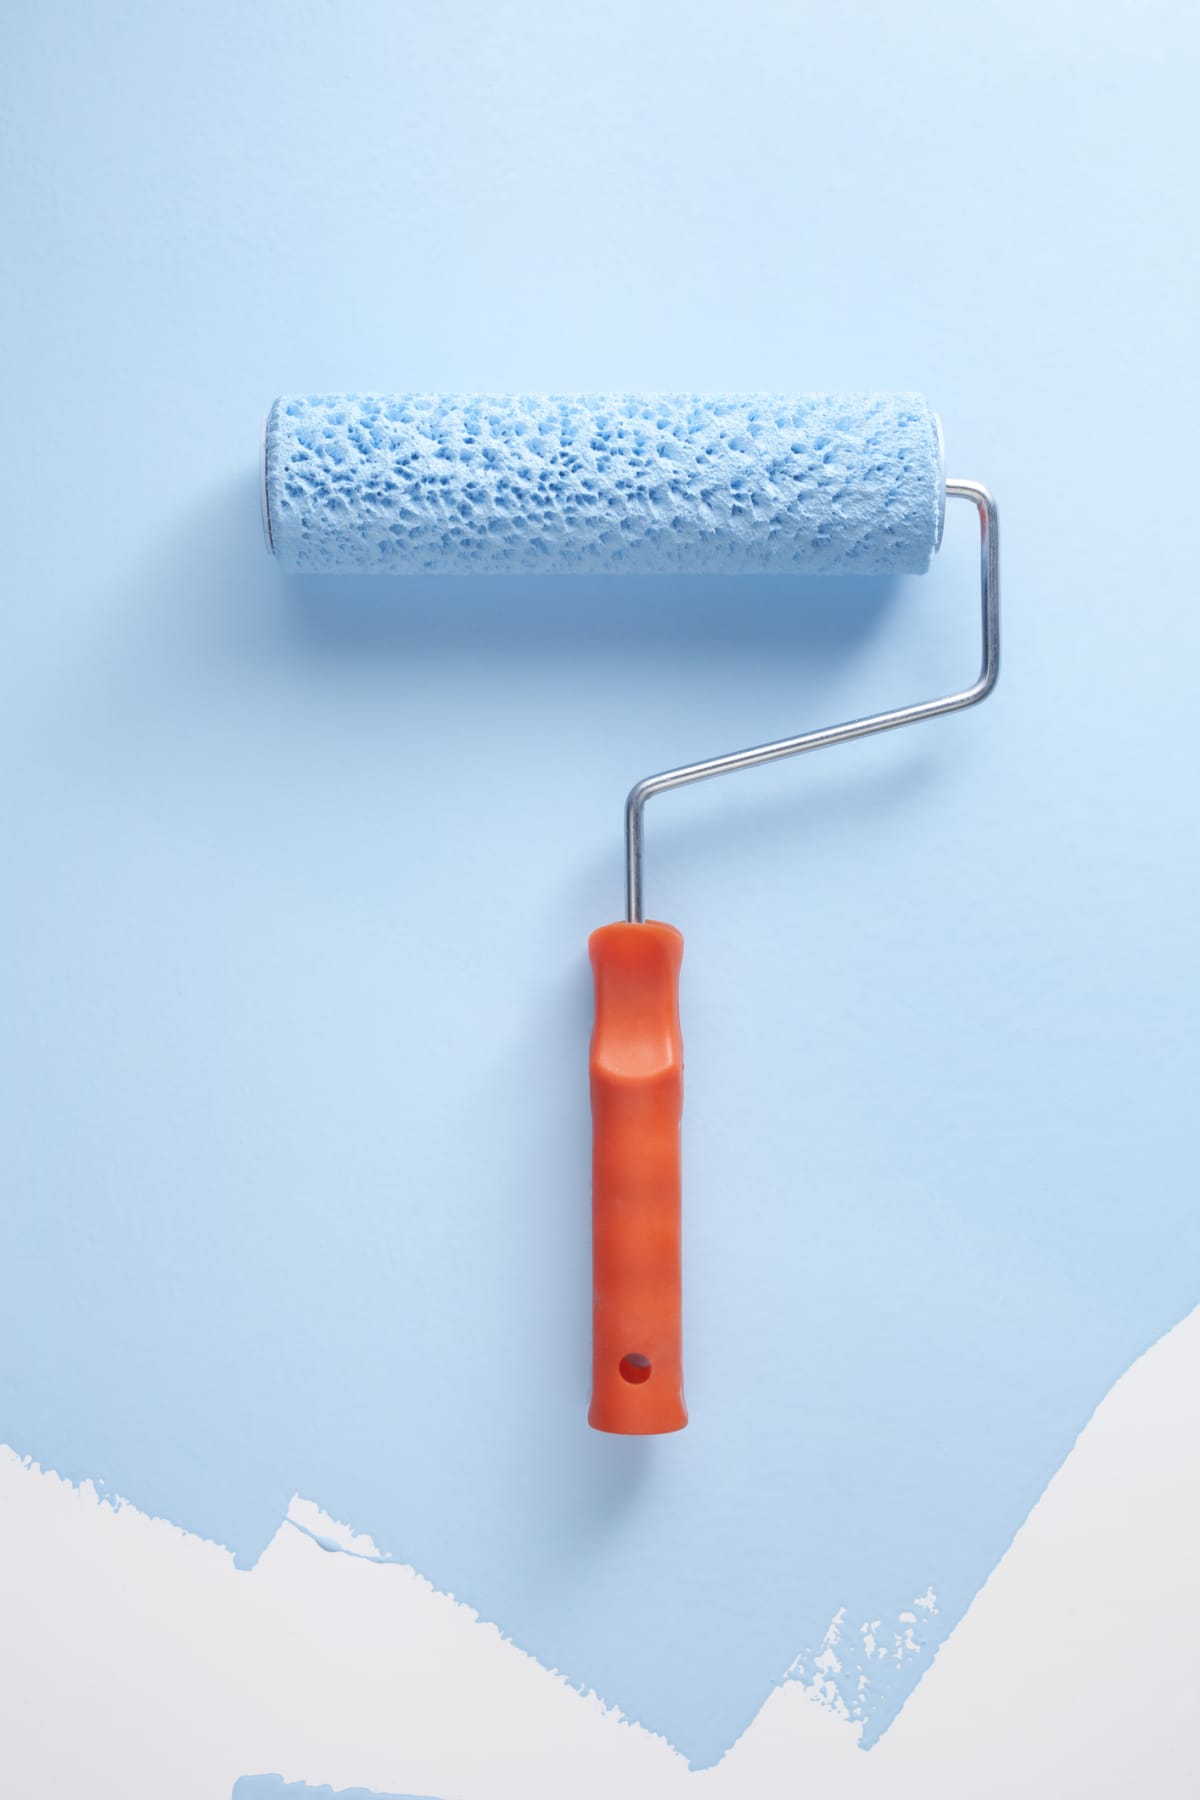 Paint roller painting a wall light blue